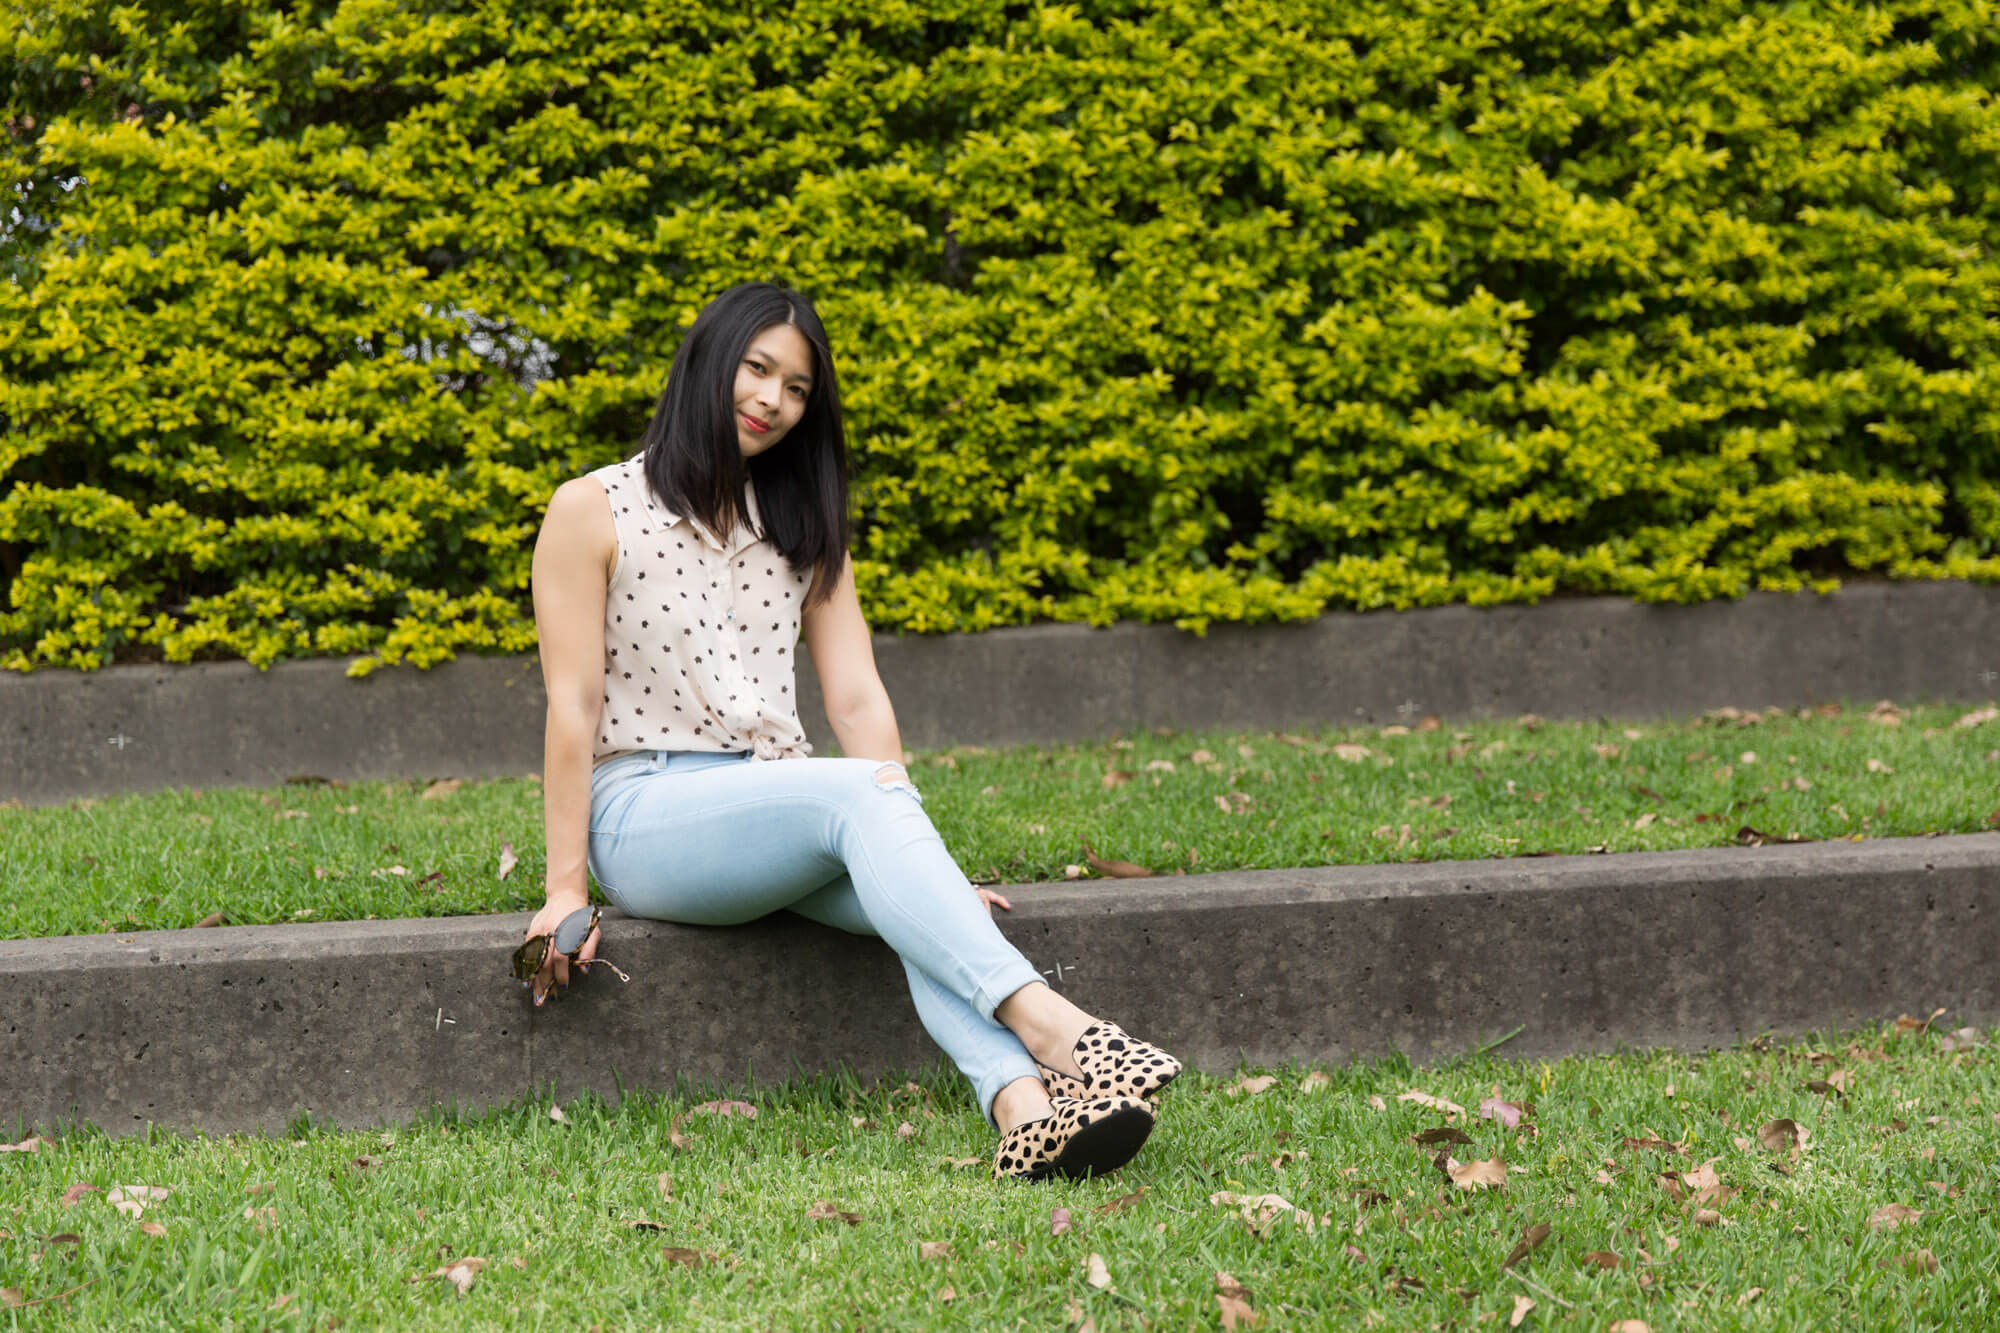 A woman sitting on a concrete step of a grassy area. She has her legs outstretched towards the camera, slightly at an angle, with both hands at her sides for support. In one hand she is also holding a pair of glasses